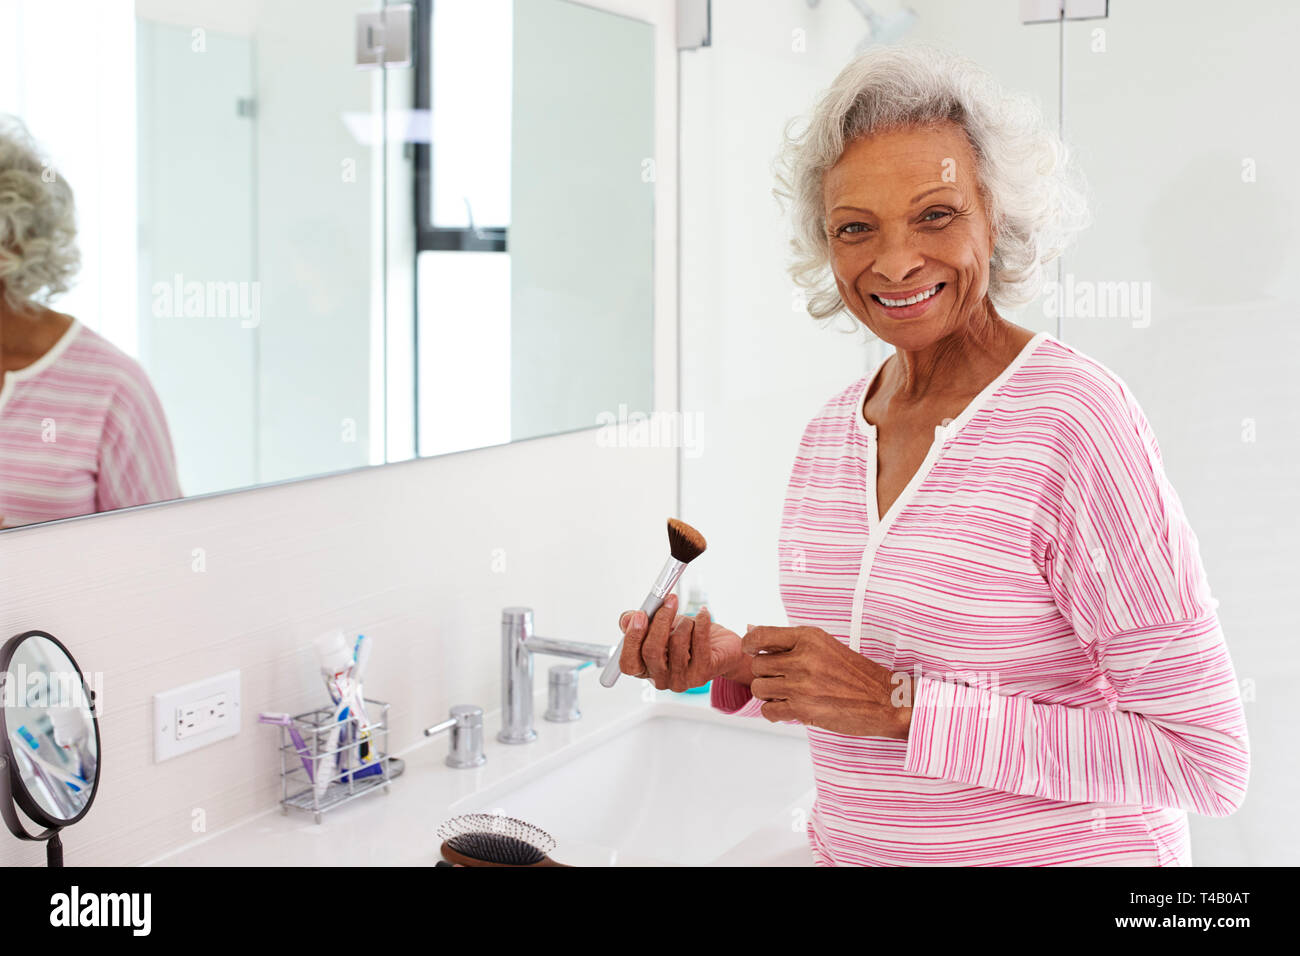 Portrait Of Senior Woman In Bathroom Putting On Make Up Stock Photo